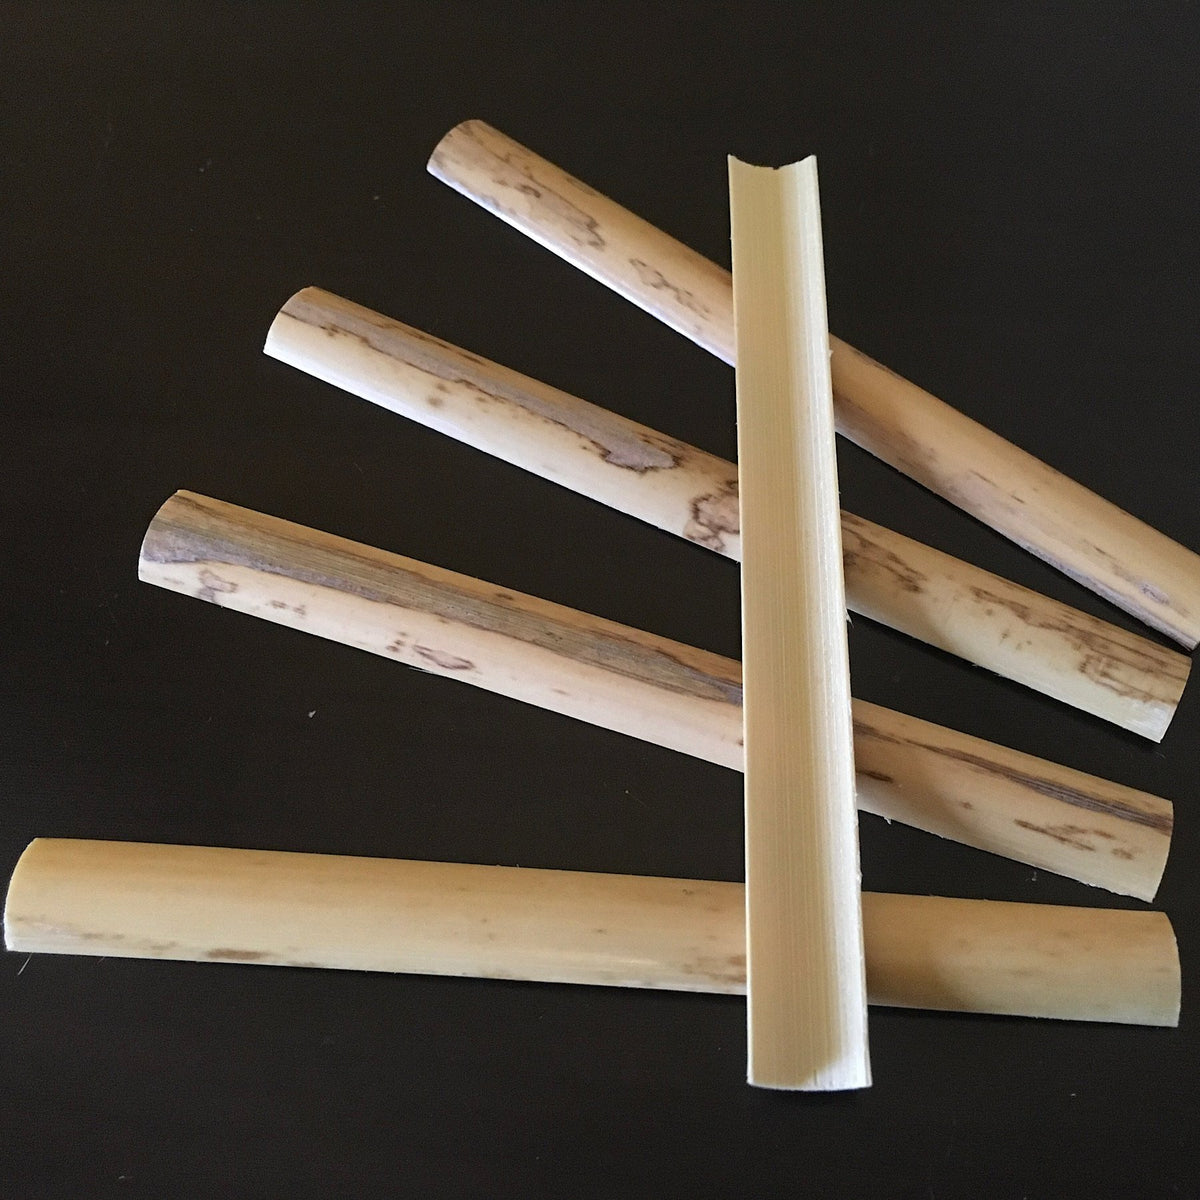 gouged oboe cane, ready to be made into your best oboe reed